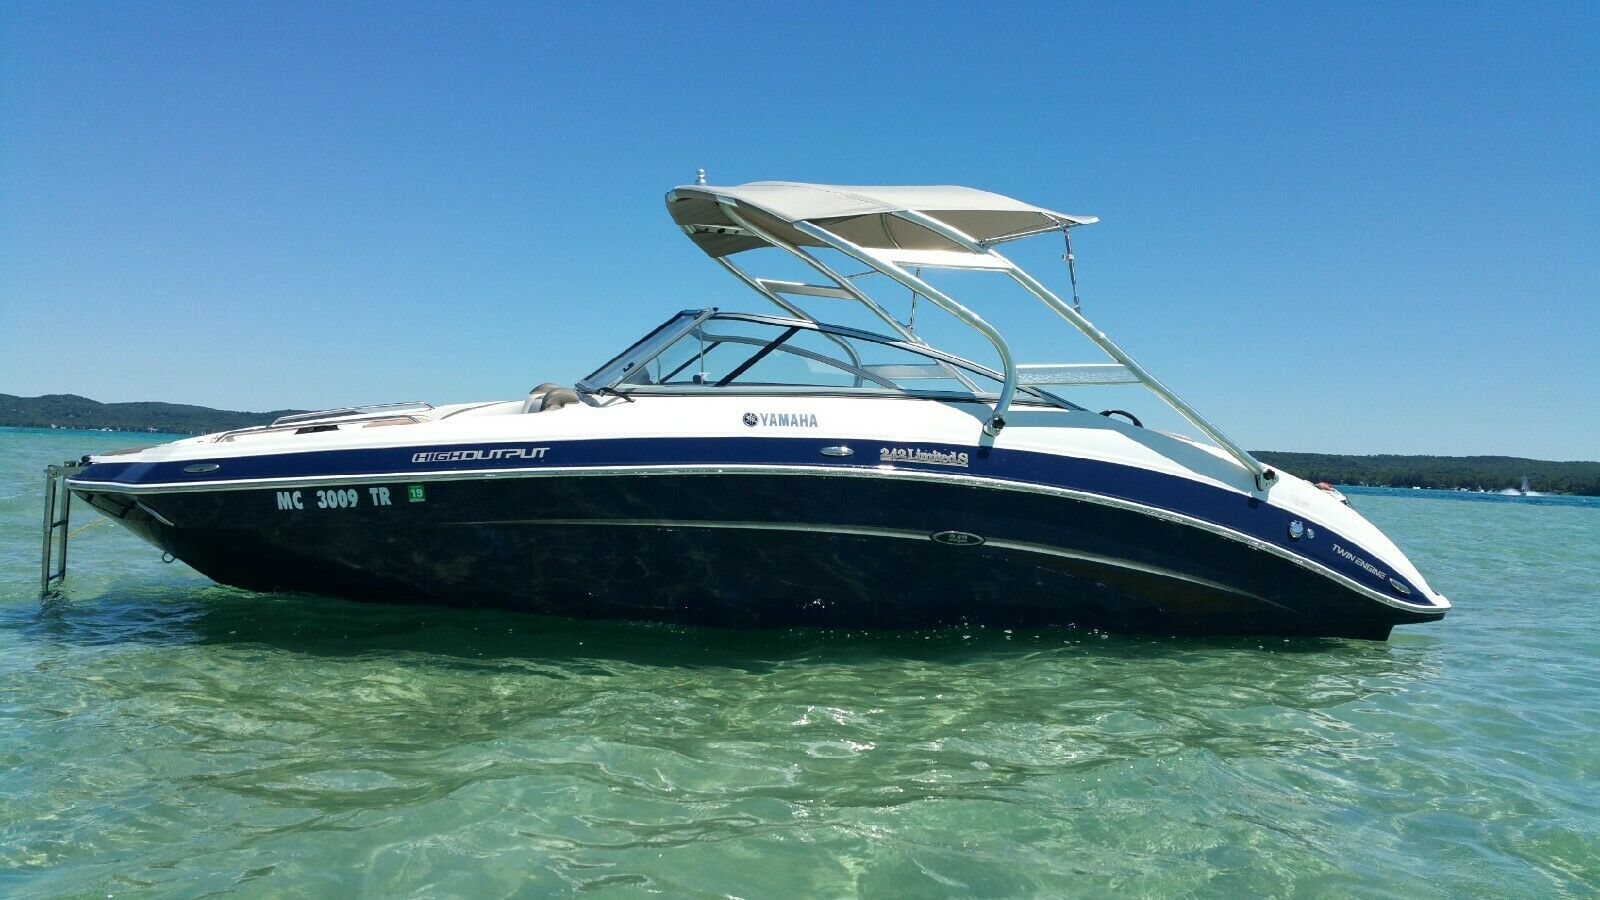 Yamaha 242 Limited S Jet Boat 2014 for sale for $47,500 - Boats-from